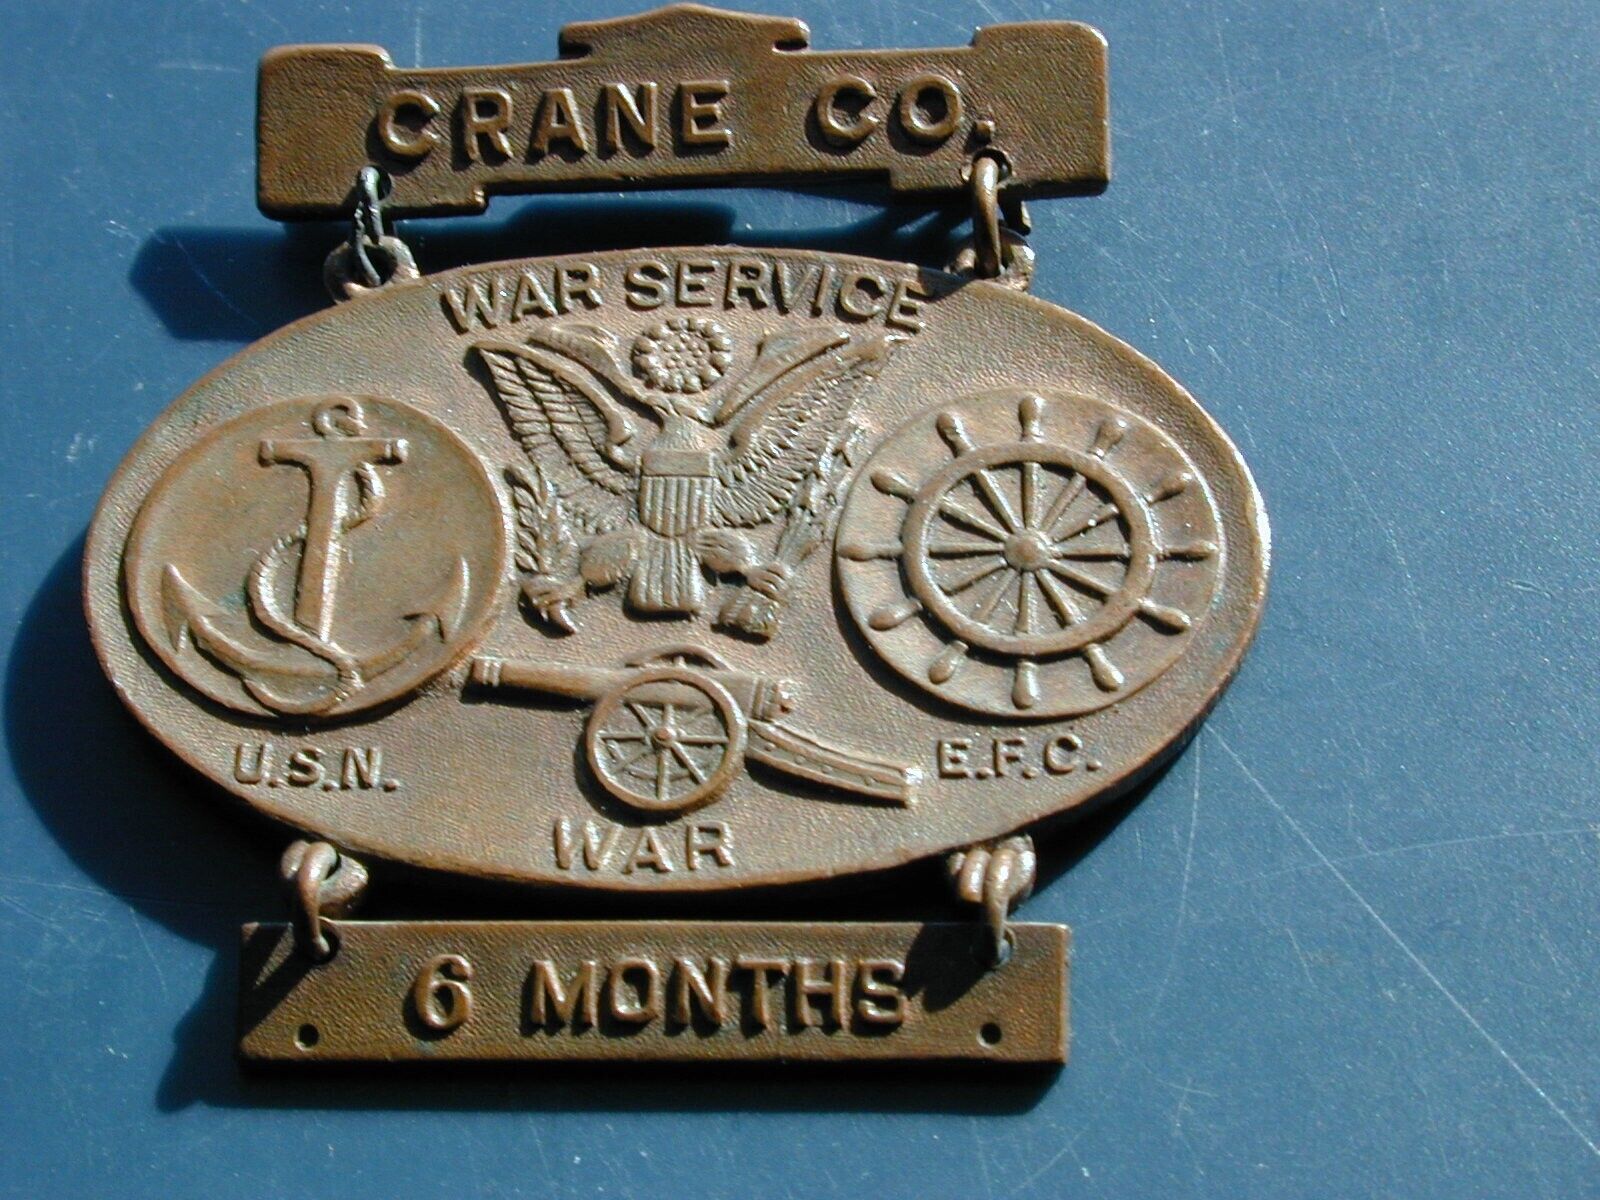 CRANE CO. 1918 EMPLOYEE PIN FOR NAVY SERVICE IN WW1 TO J. GRELA COMPLETE W PIN